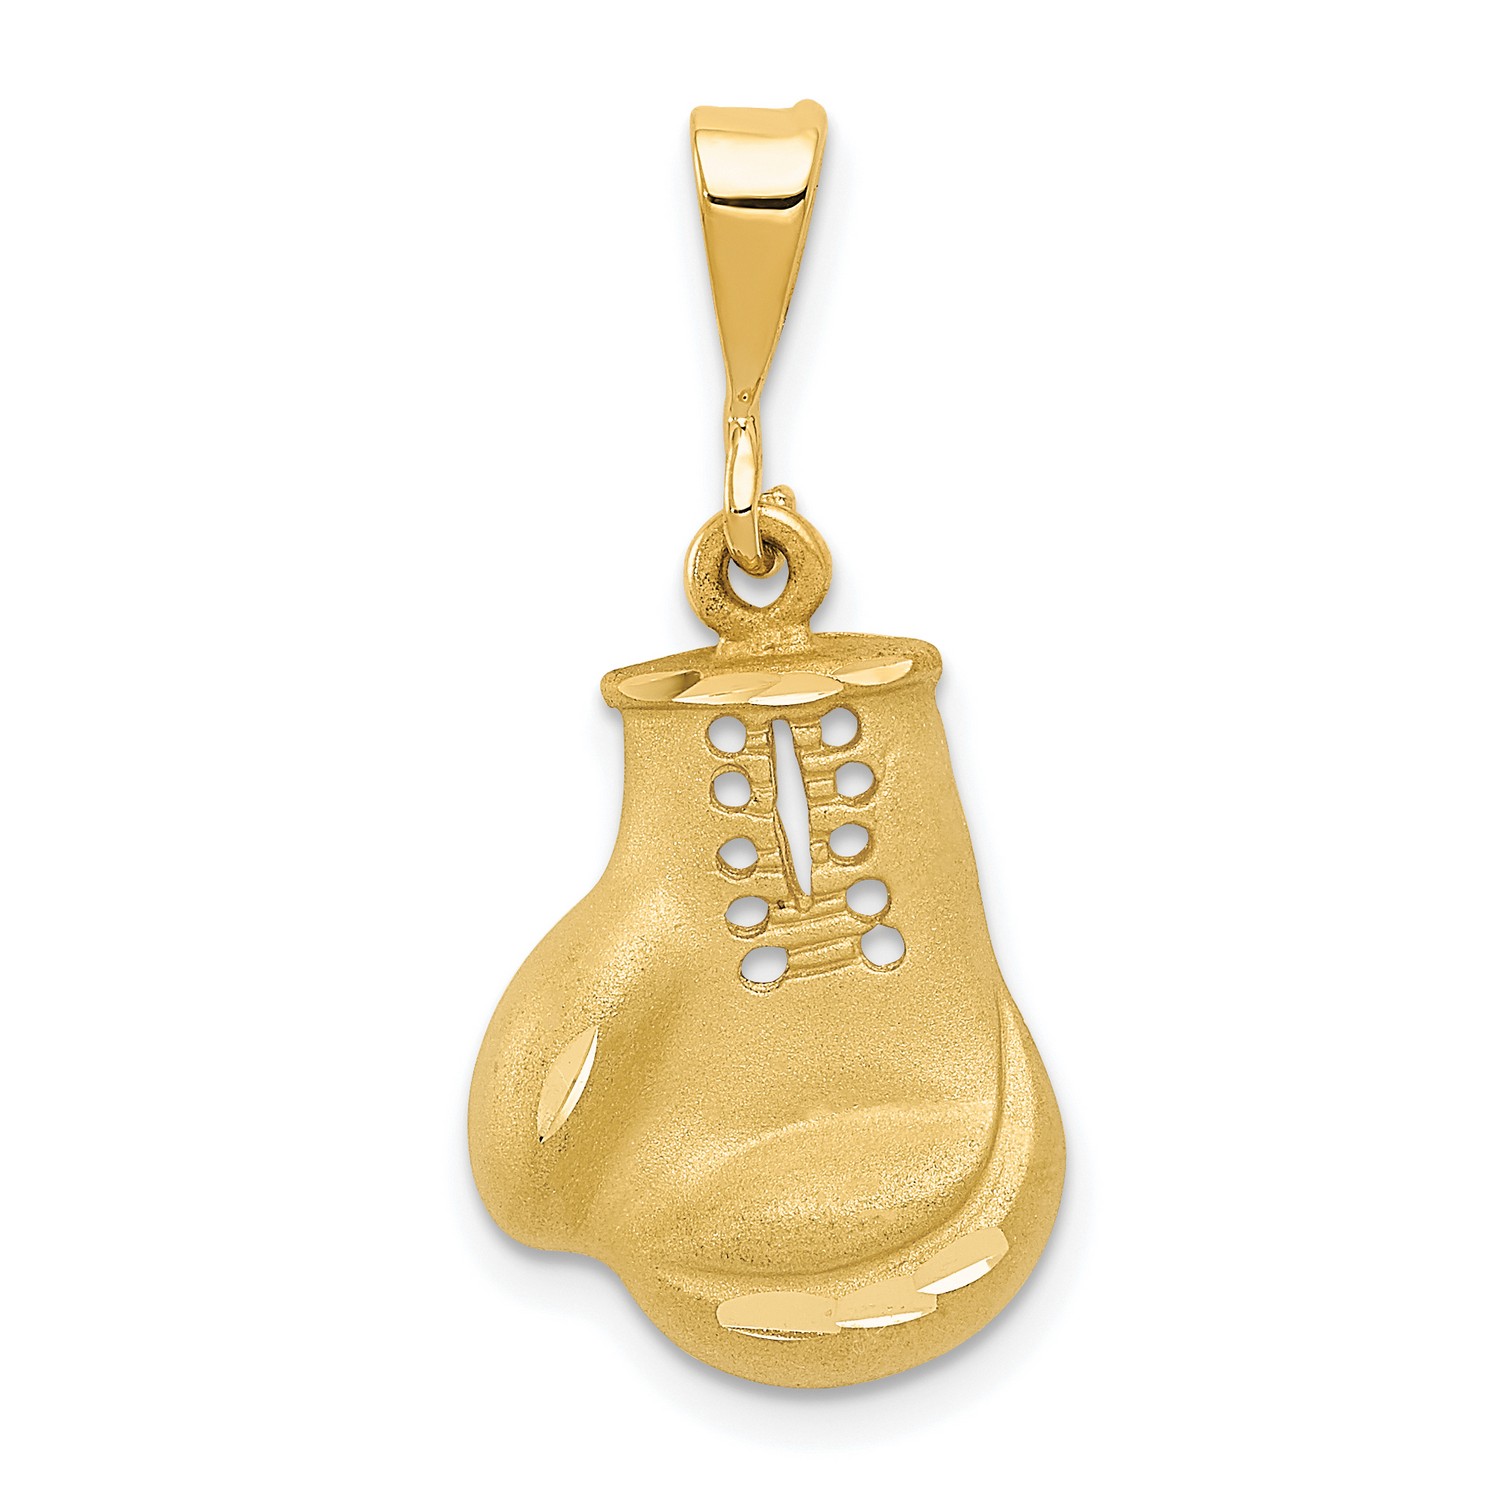 Pre-owned Jewelry Stores Network 14k Yellow Gold Boxing Glove Charm Pendant